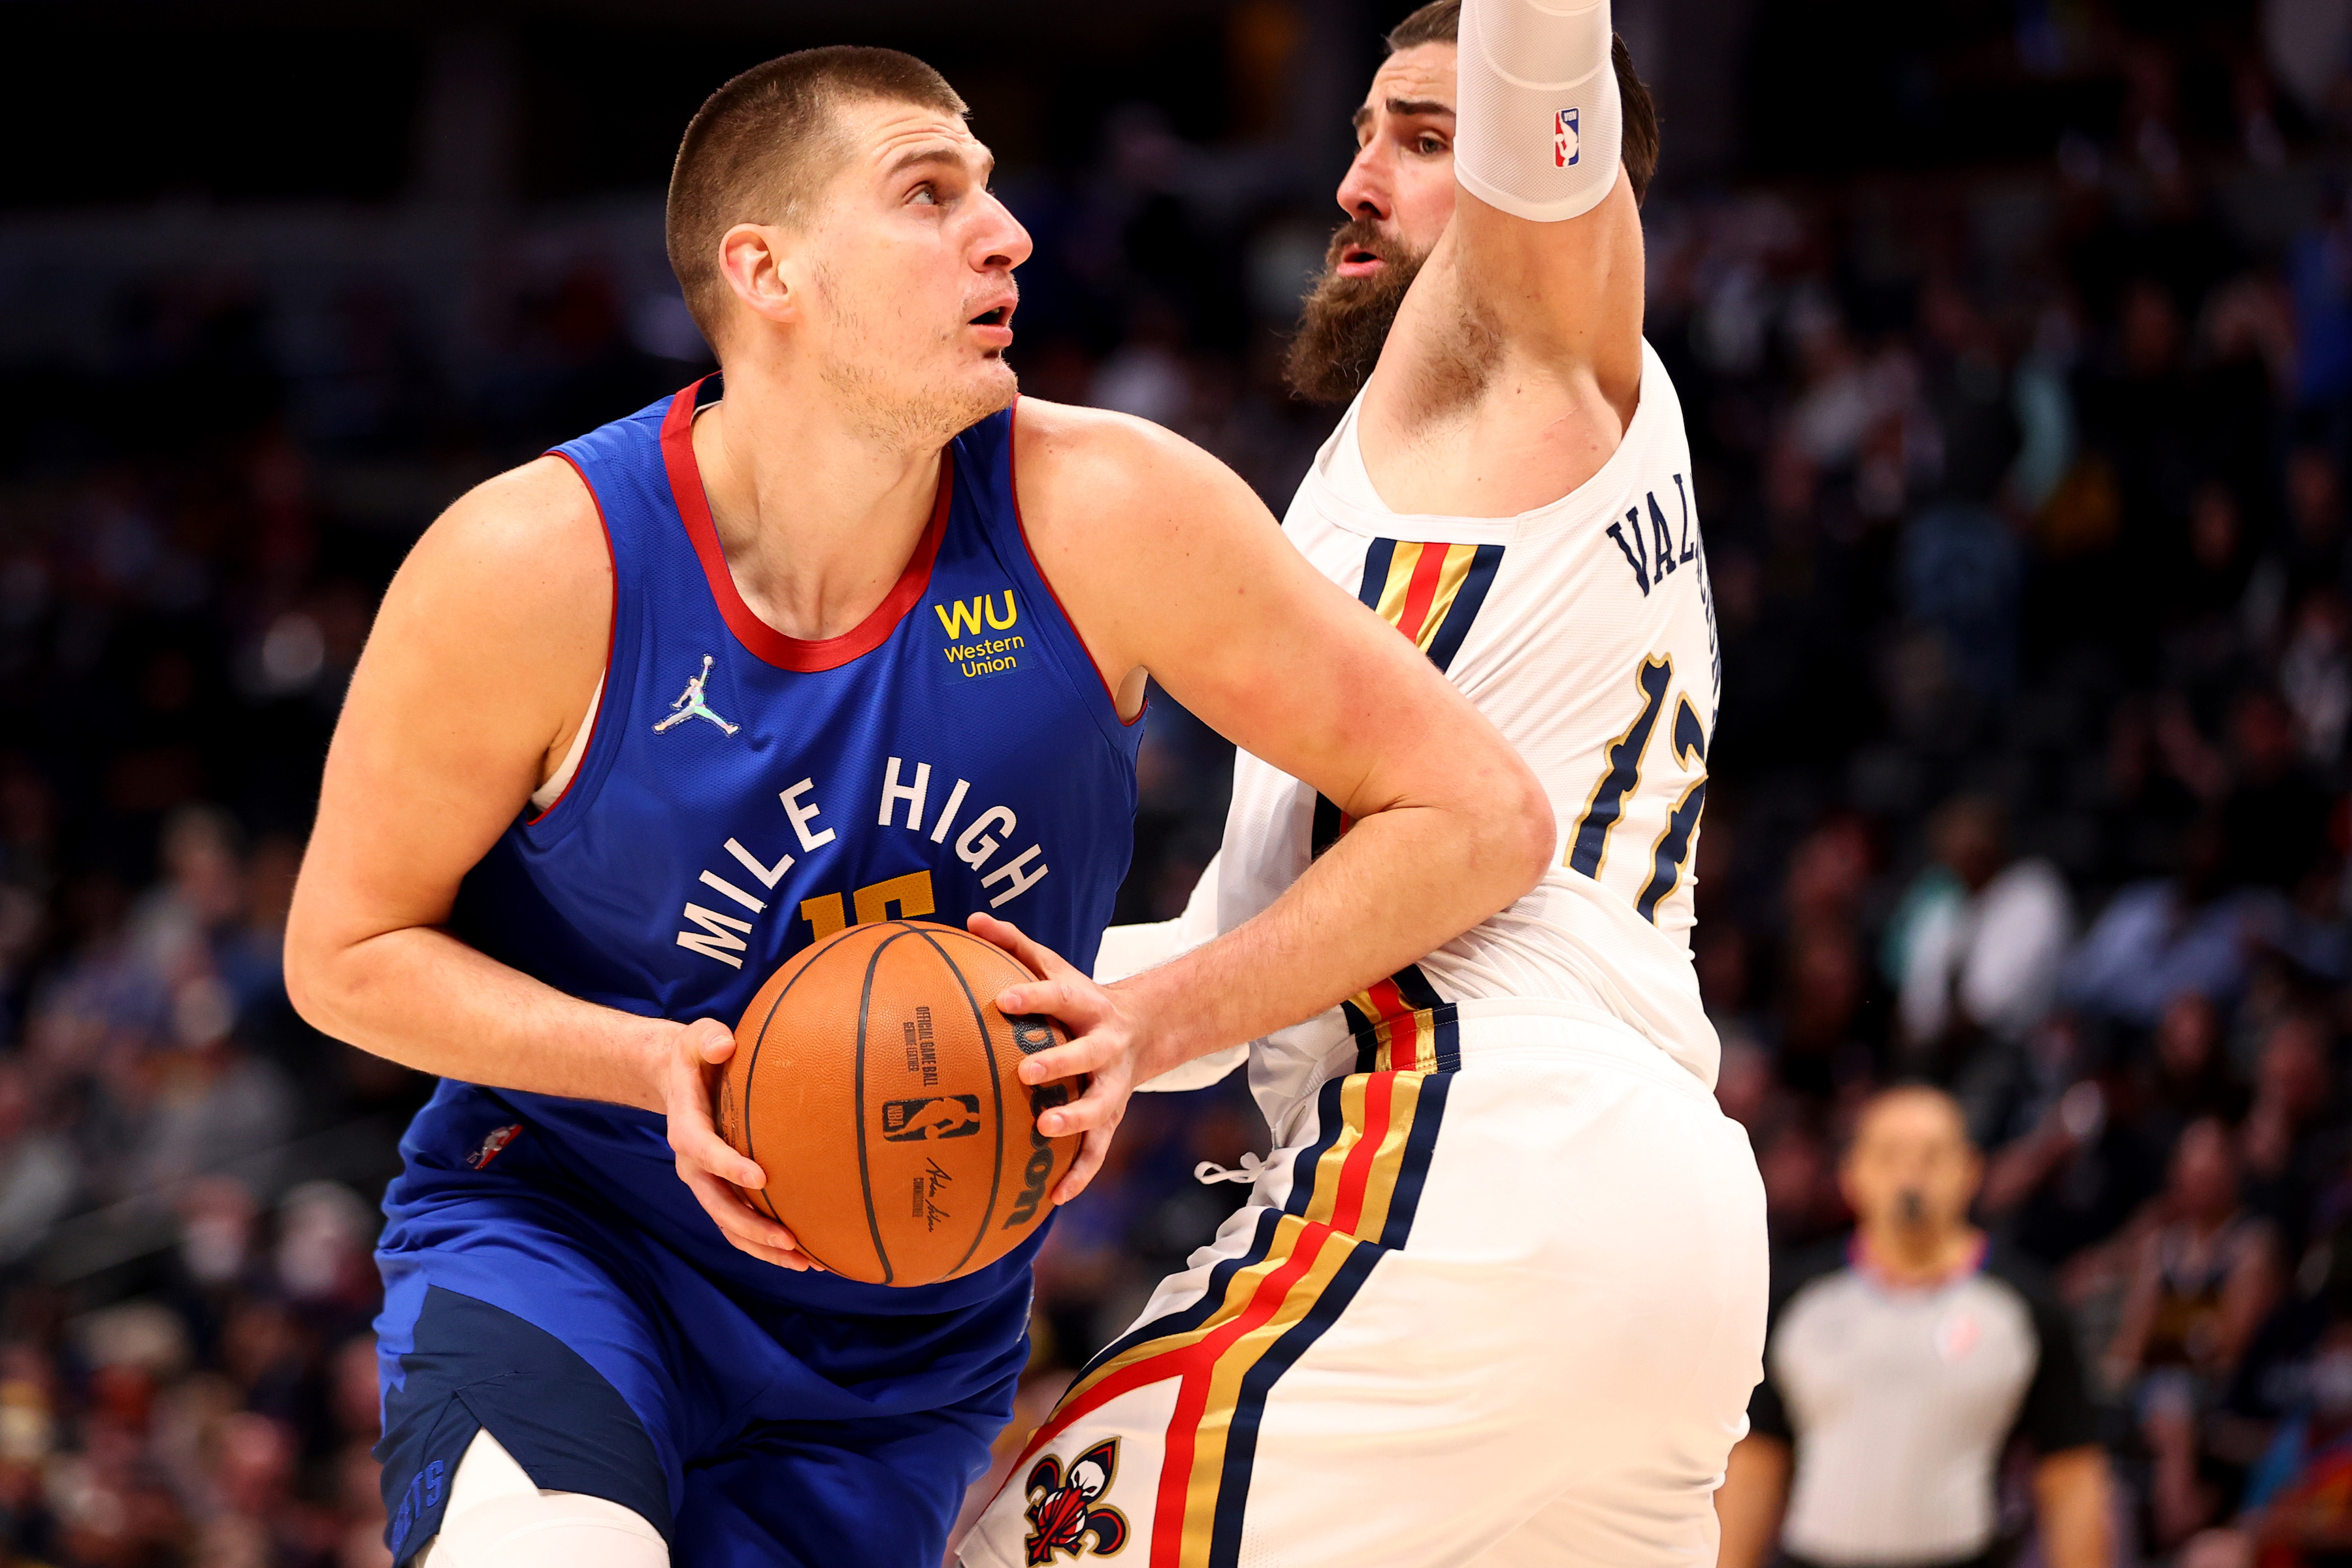 Denver Nuggets center Nikola Jokic prepares to shoot during an NBA game against the New Orleans Pelicans